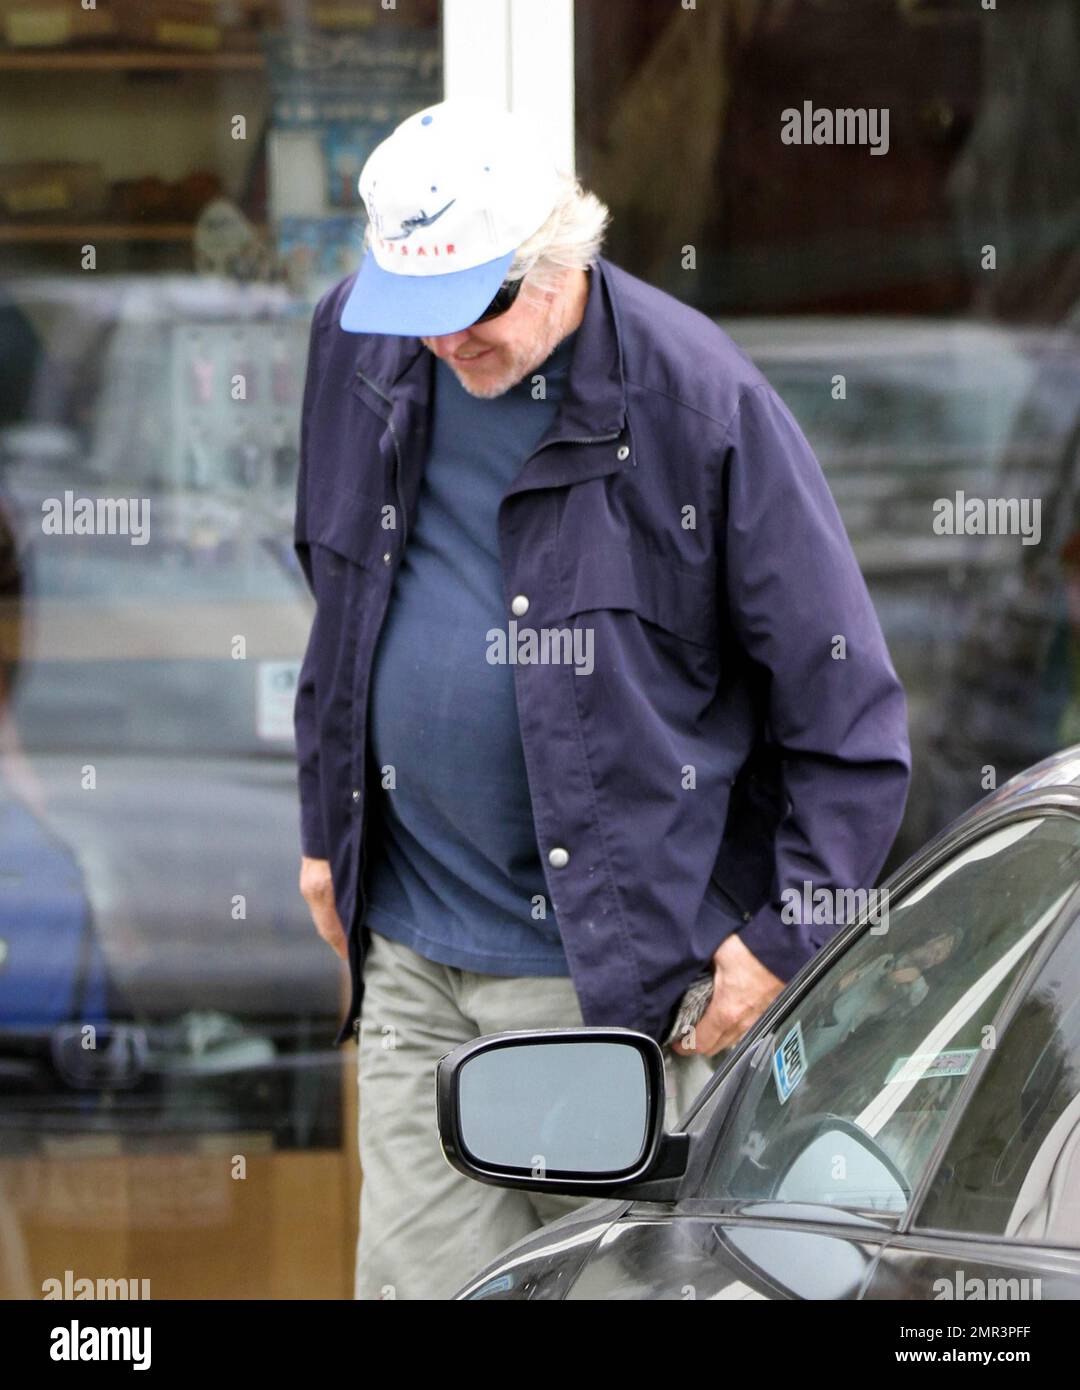 EXCLUSIVE!! Gary Busey takes a well worn pair of moccasins to the shoe repair shop. Busey, 67, who filed for chapter 7 bankruptcy Feb. 7 claimed $500,000 in debts and $26,225 in assets, including old moccasins, two teepees, a broken pellet gun, an old bull's head and 300 VHS tapes. Presumably, the actor was repairing the moccasins mentioned in the list. Busey reportedly recently passed an online financial management course required by the U.S. Bankruptcy Court with top marks. Malibu, CA. 31st March 2012. Stock Photo